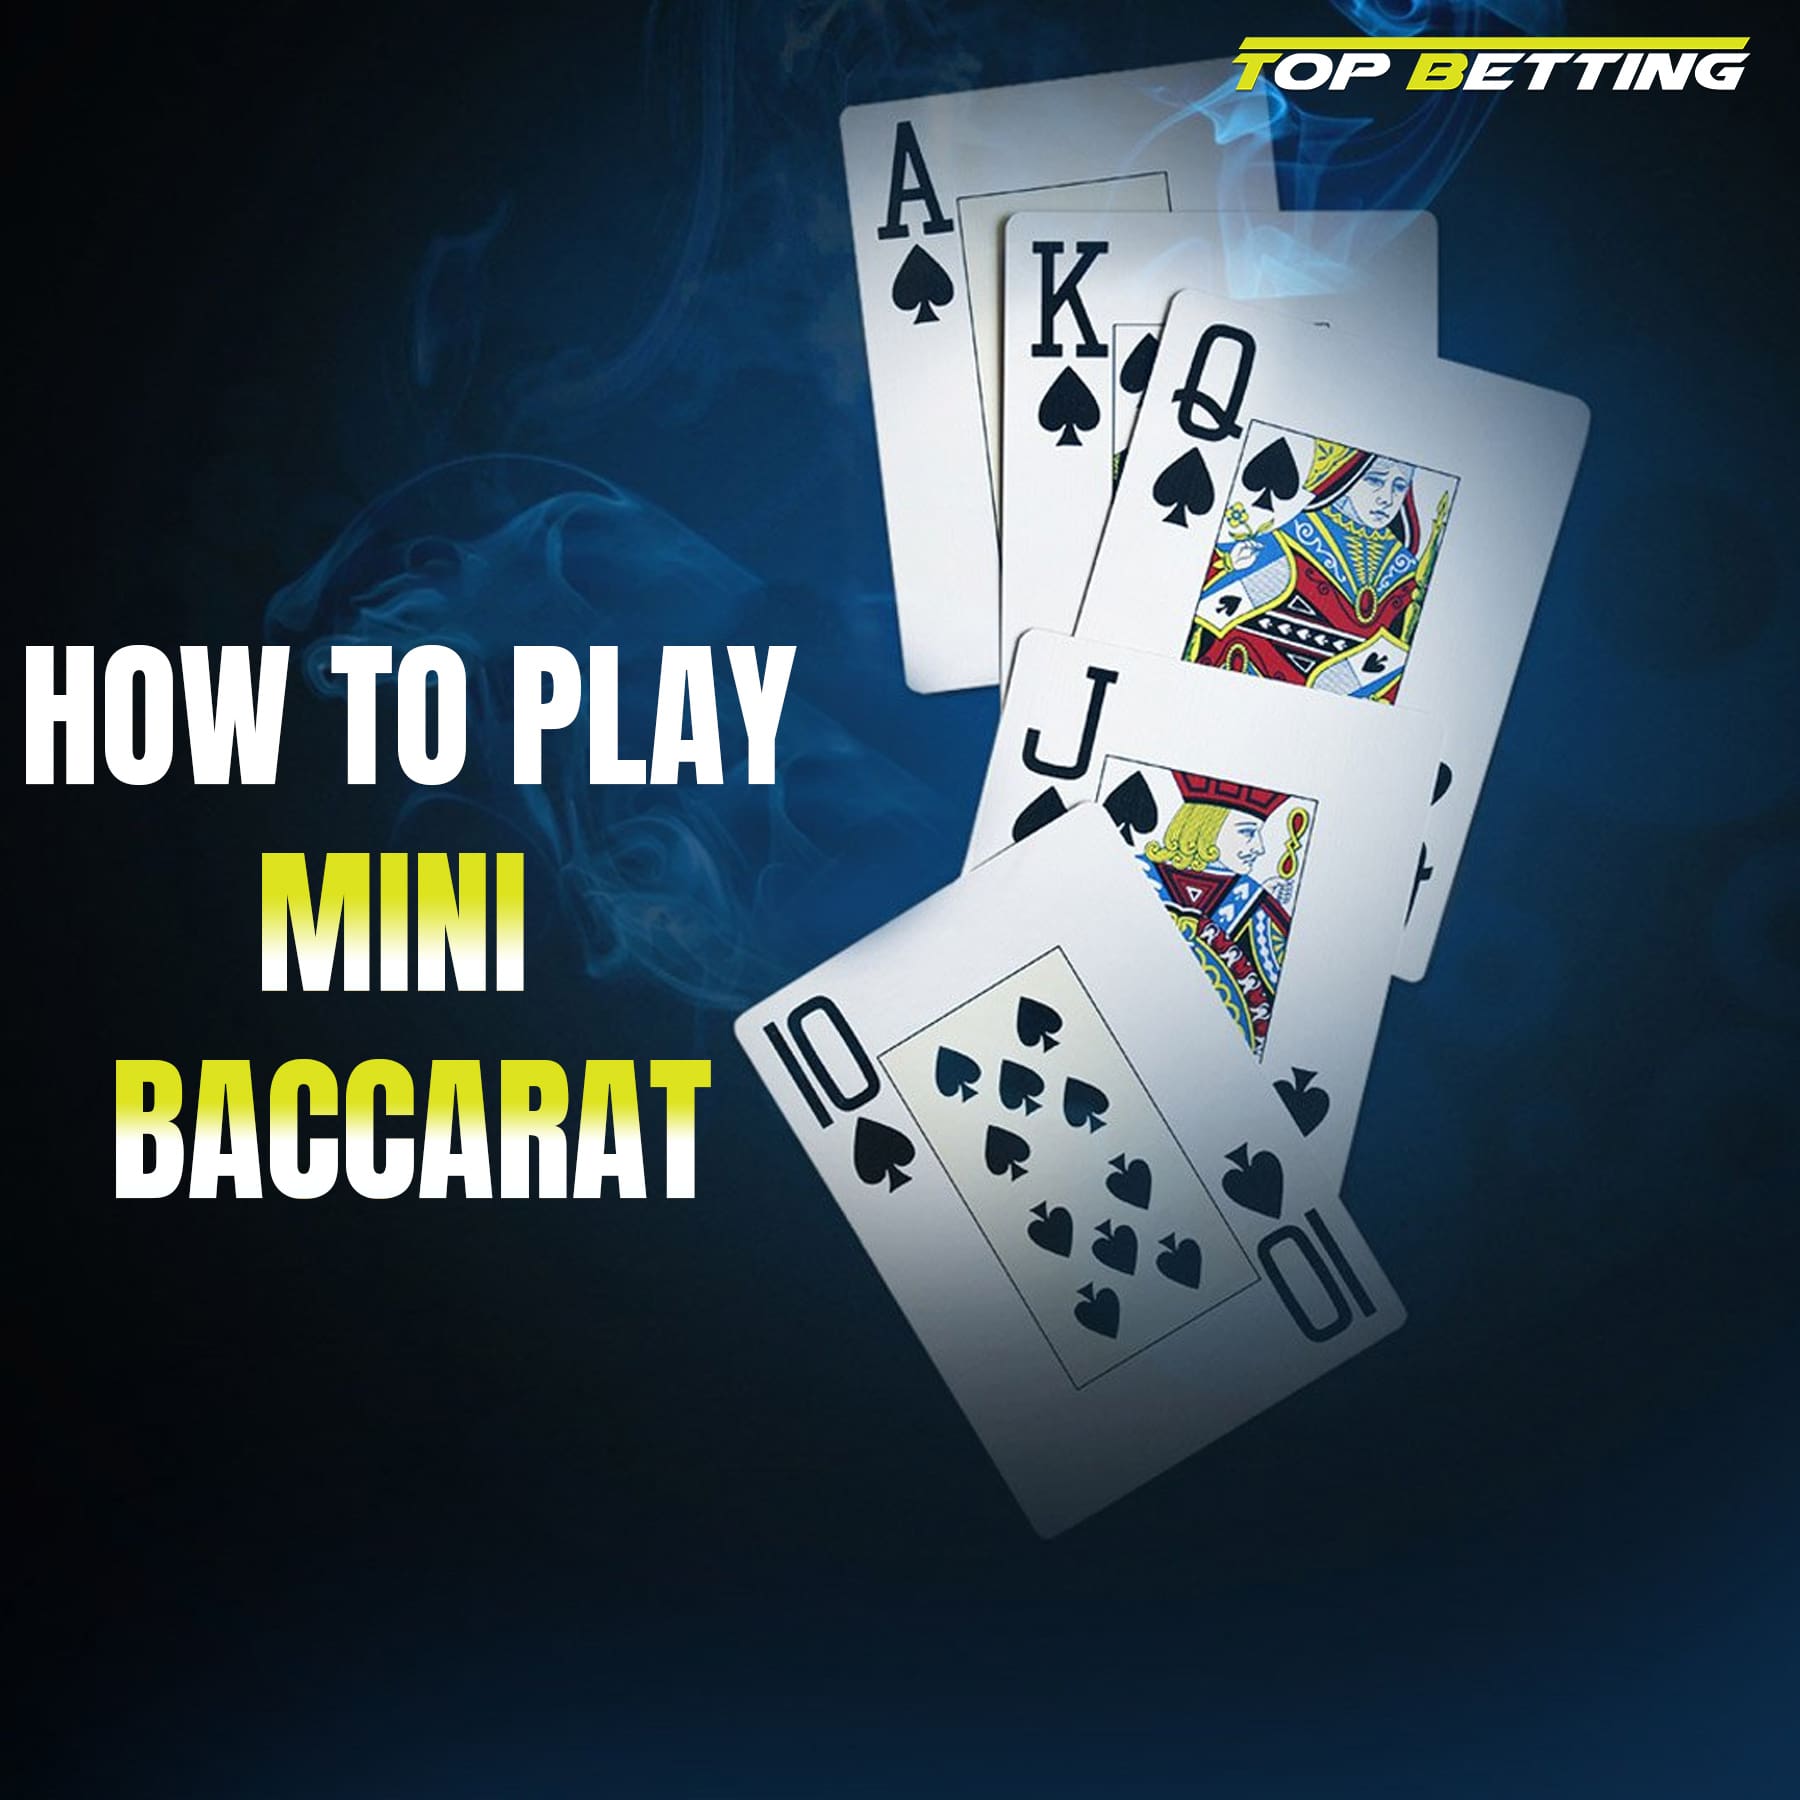 How to Play Mini Baccarat and Why Gamblers Love It